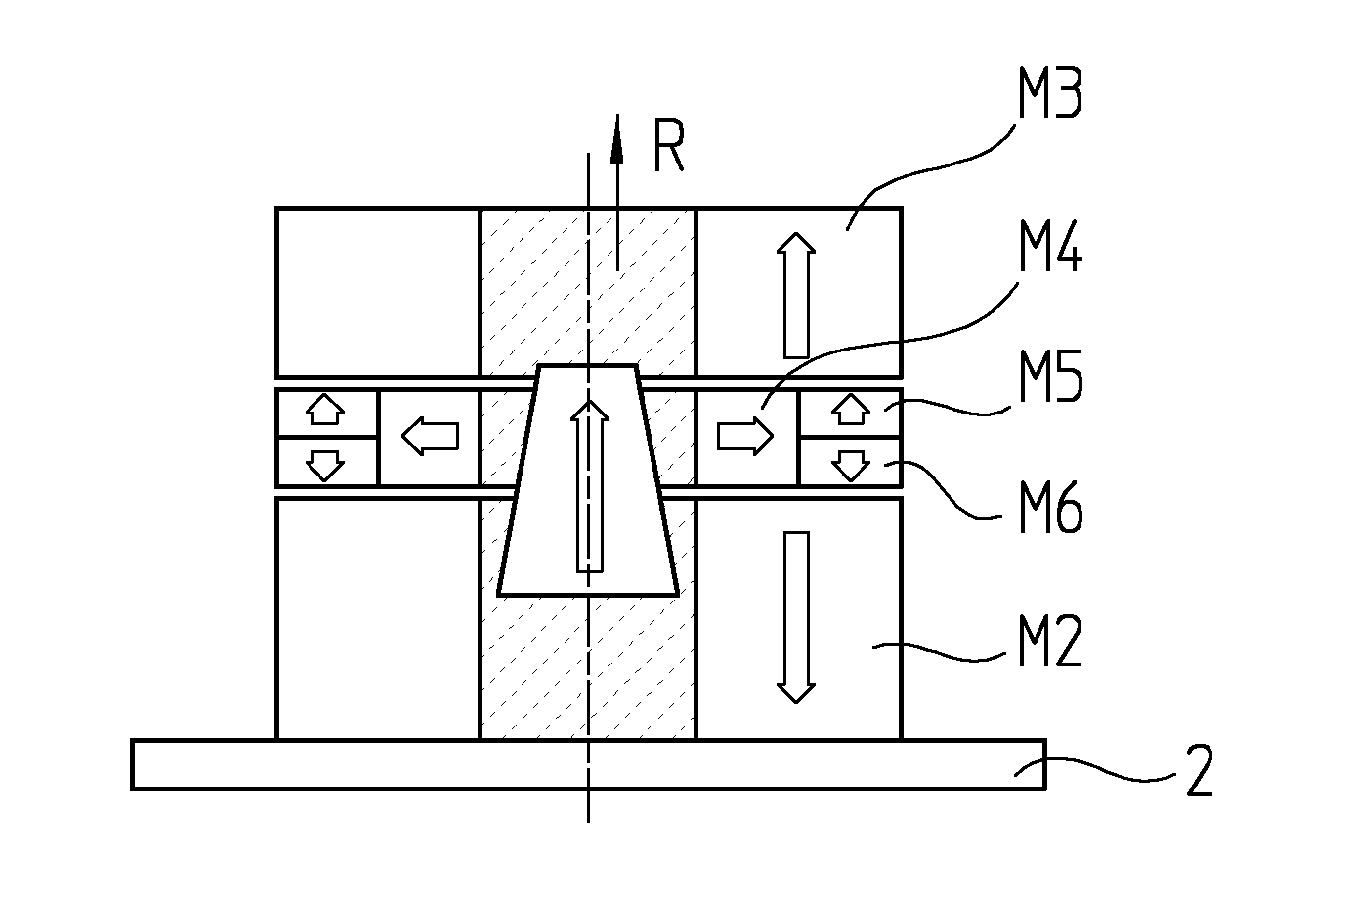 Guide having passive gravity compensation and a vertically movably mounted platform